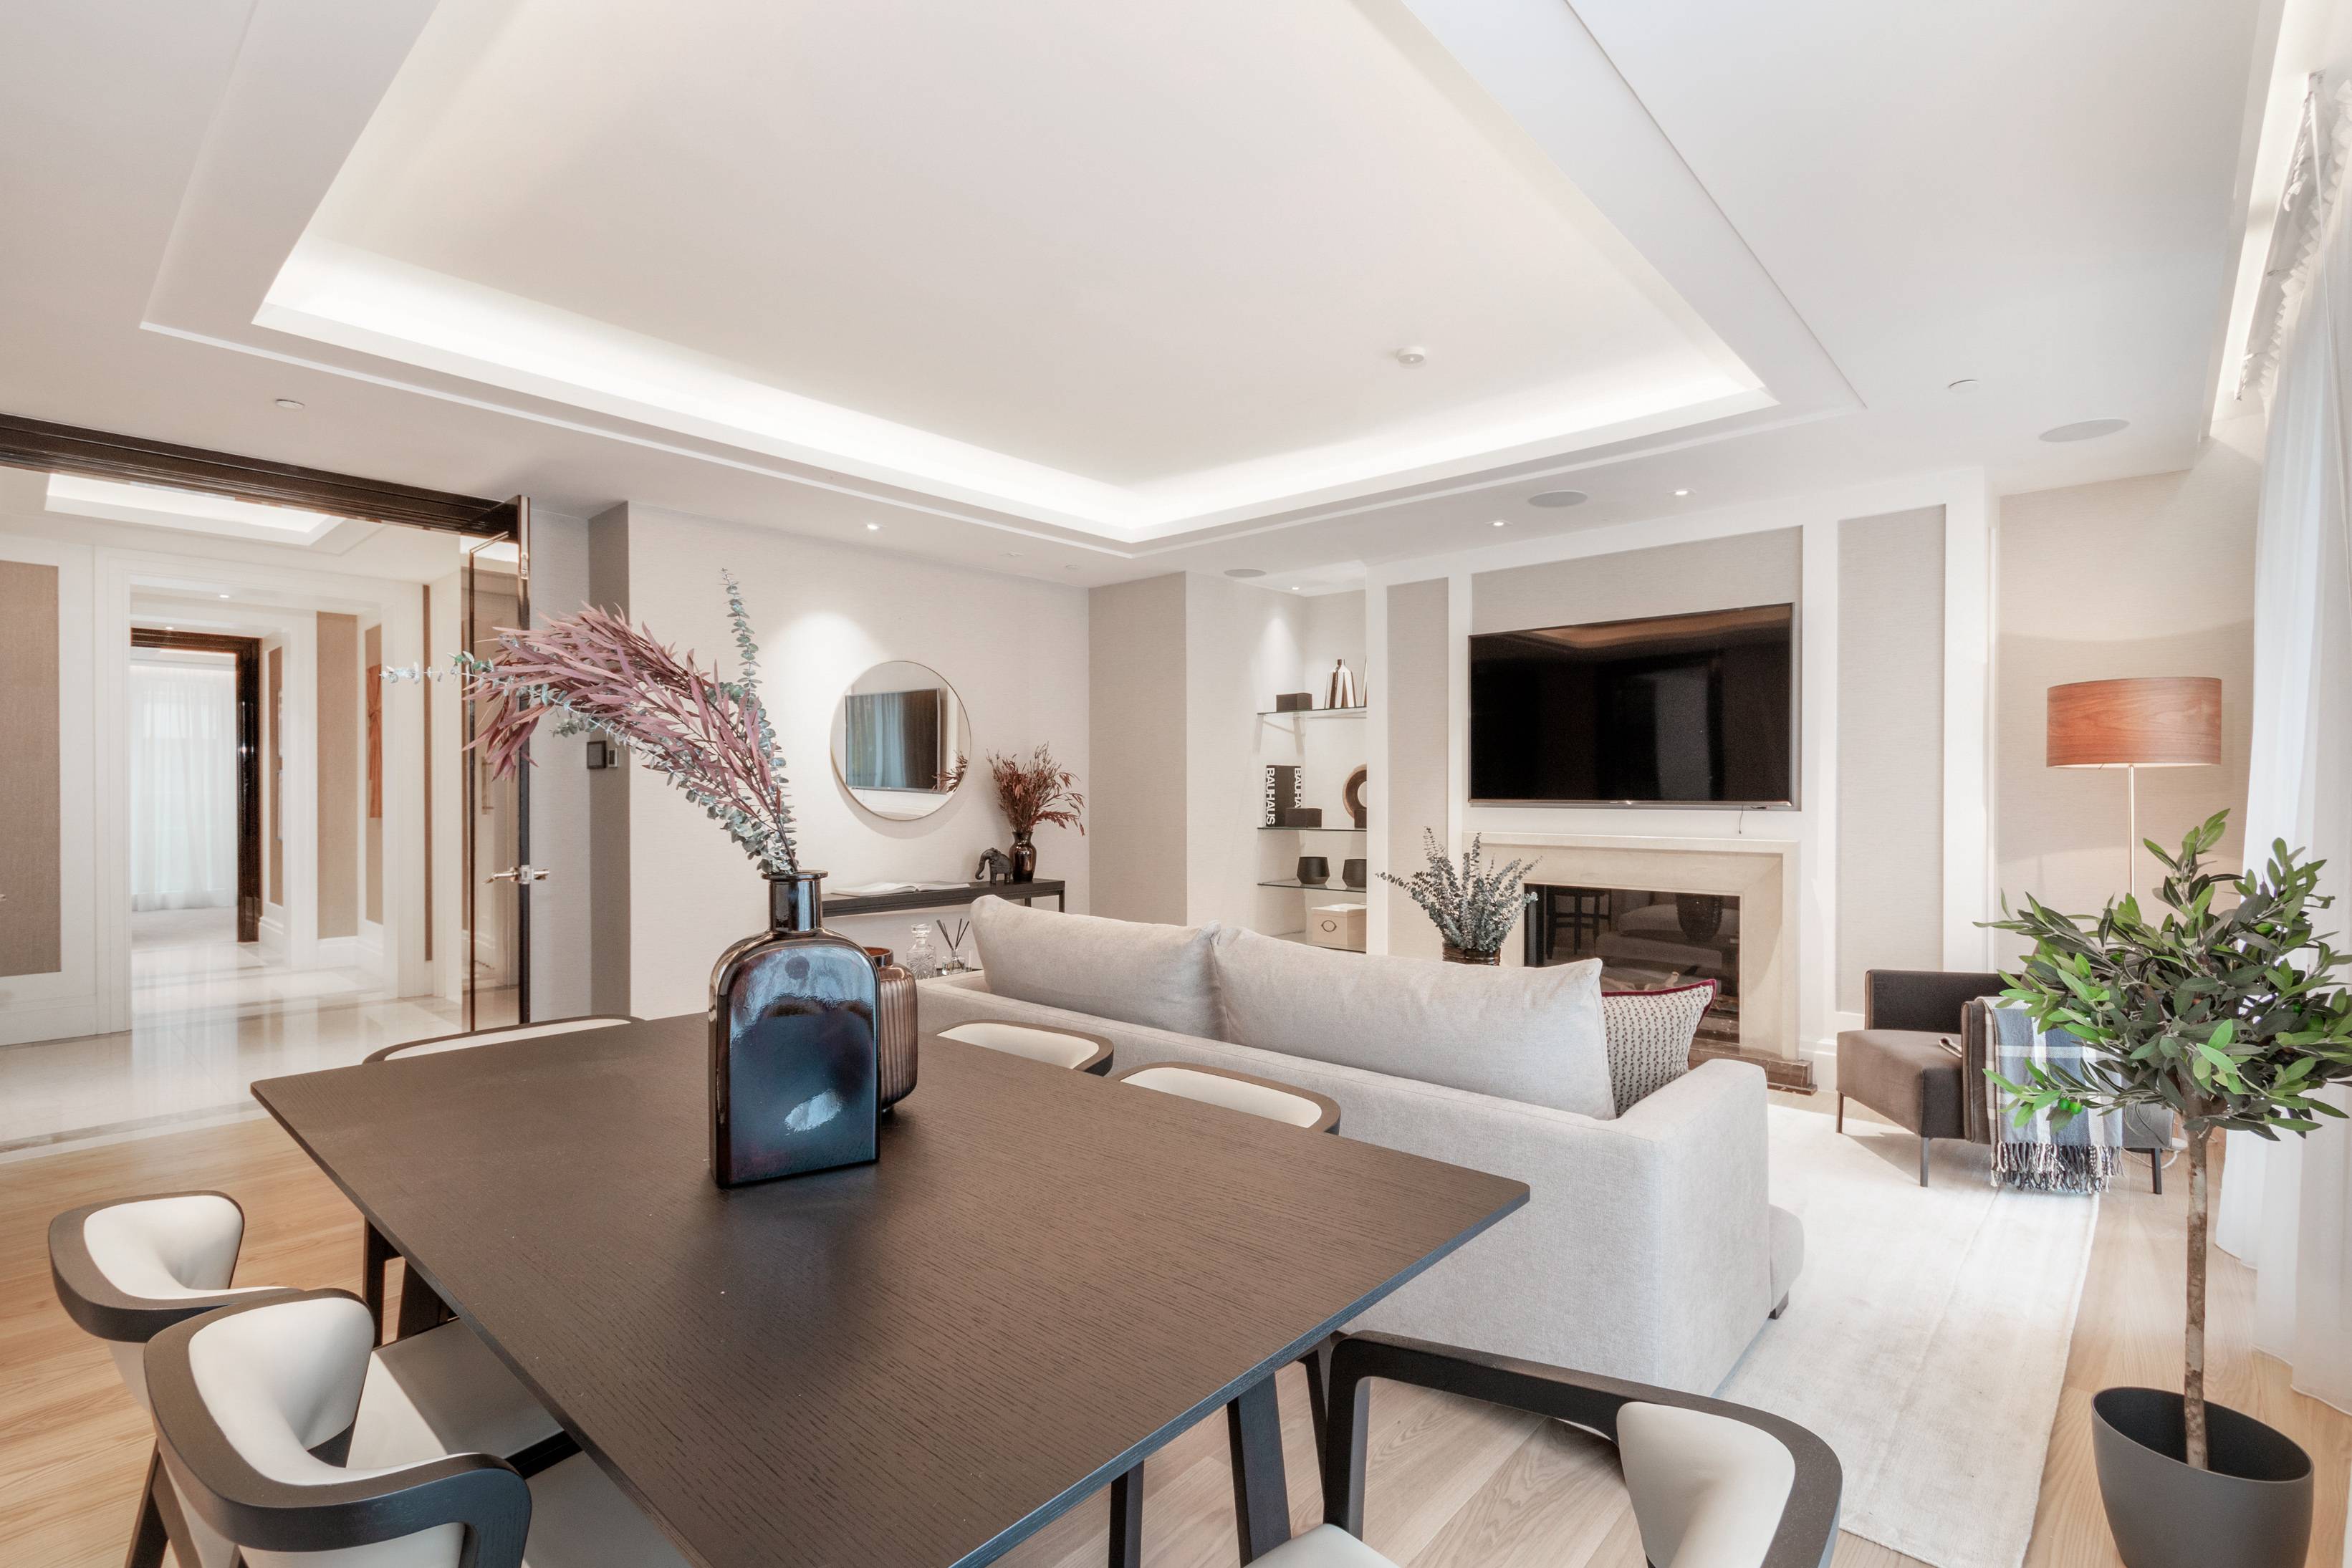 Modern three-bedroom 1,830 sqft lateral apartment set within classy development delivered by Berkeley Group developers in London’s Belgravia.